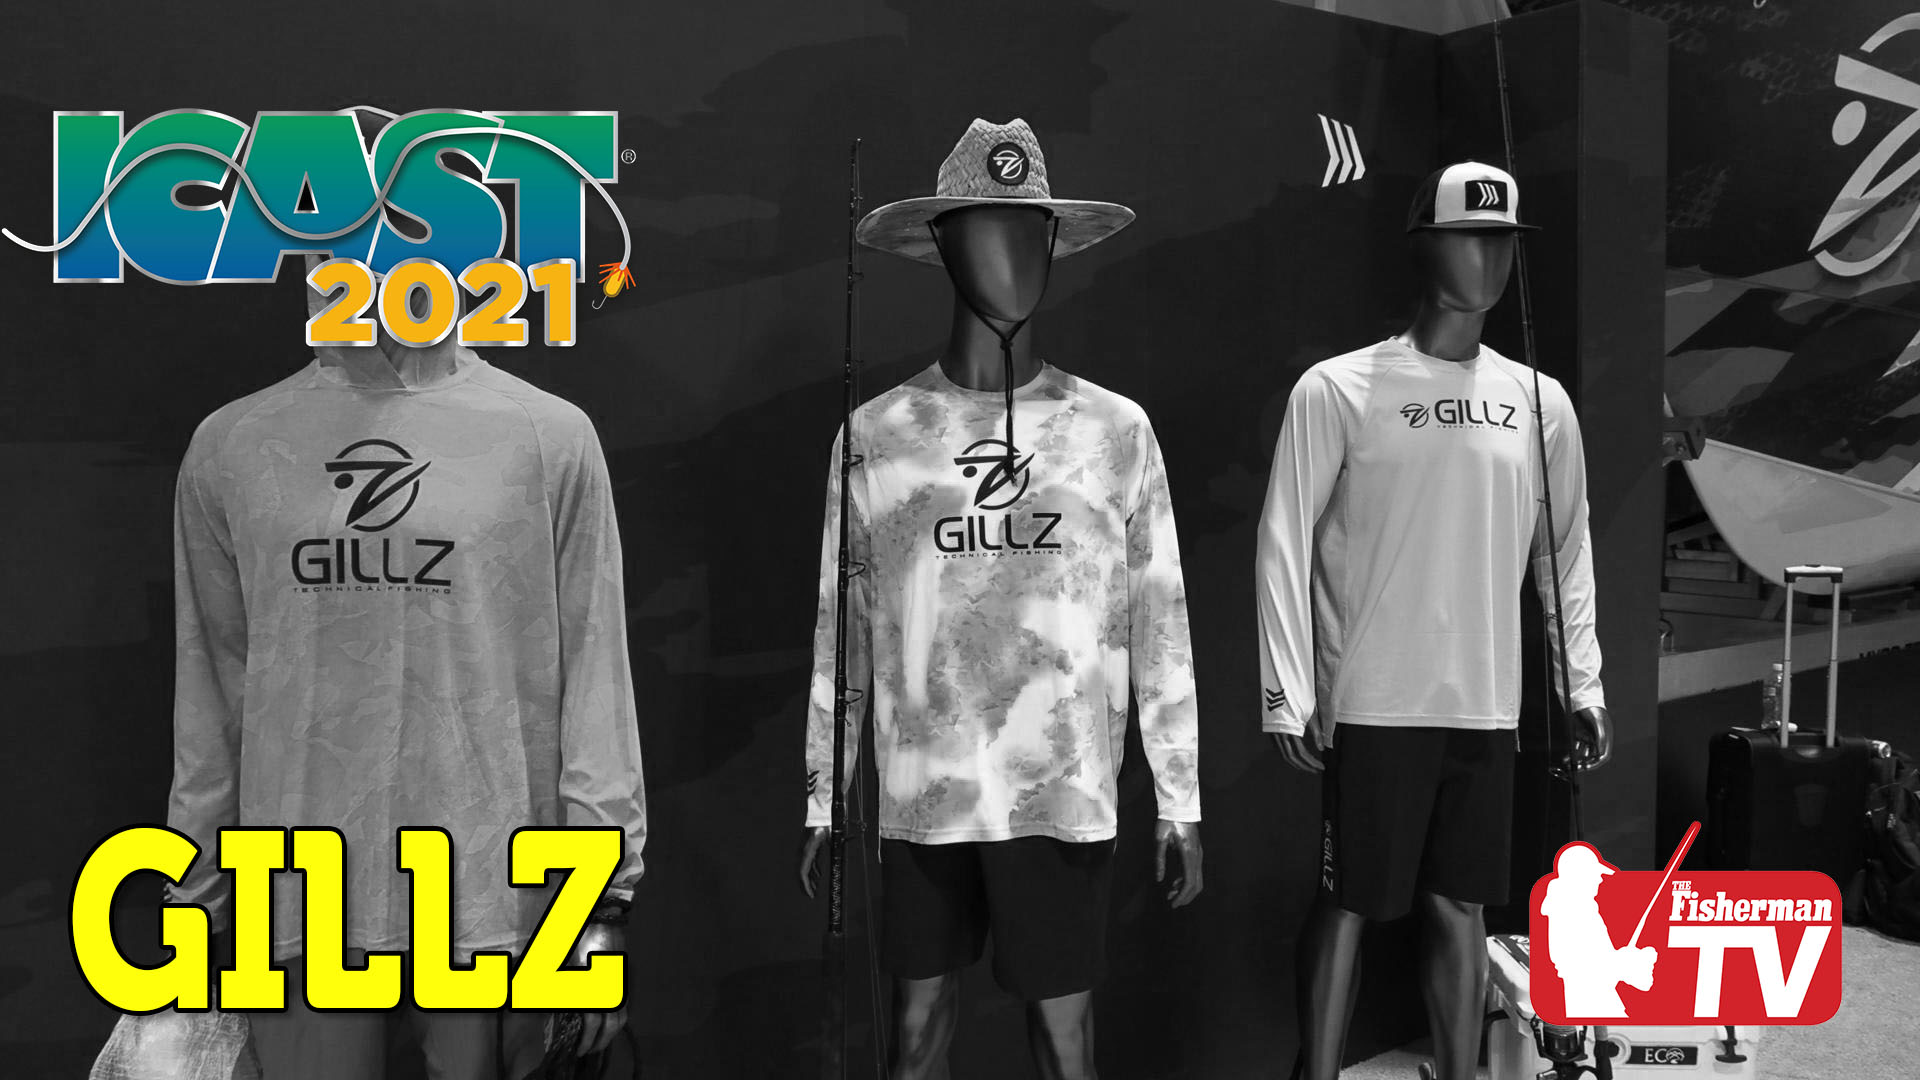 The Fisherman's “New Product Spotlight” ICAST 2021 – GILLZ Gear Appeal -  The Fisherman